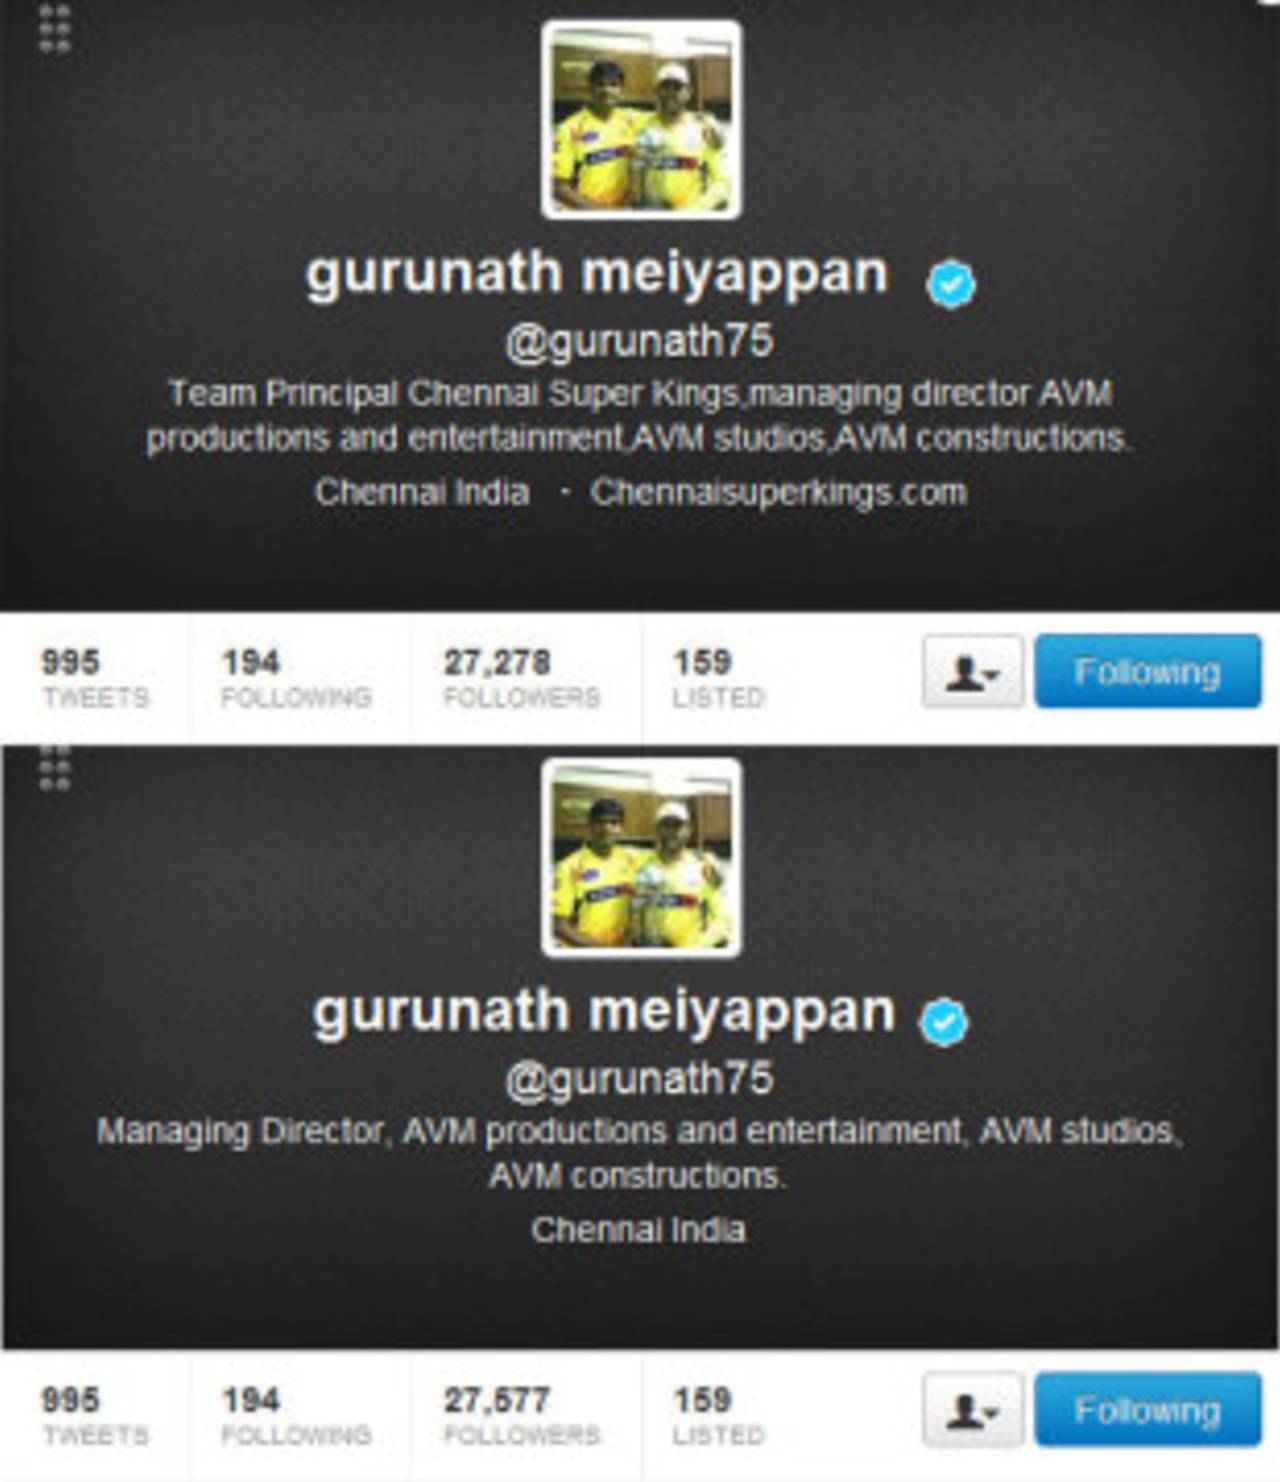 Screenshots of Gurunath Meiyappan's twitter account 30 minutes apart. The one on top claims an affiliation with Chennai Super Kings, but the one below reflects some interesting changes